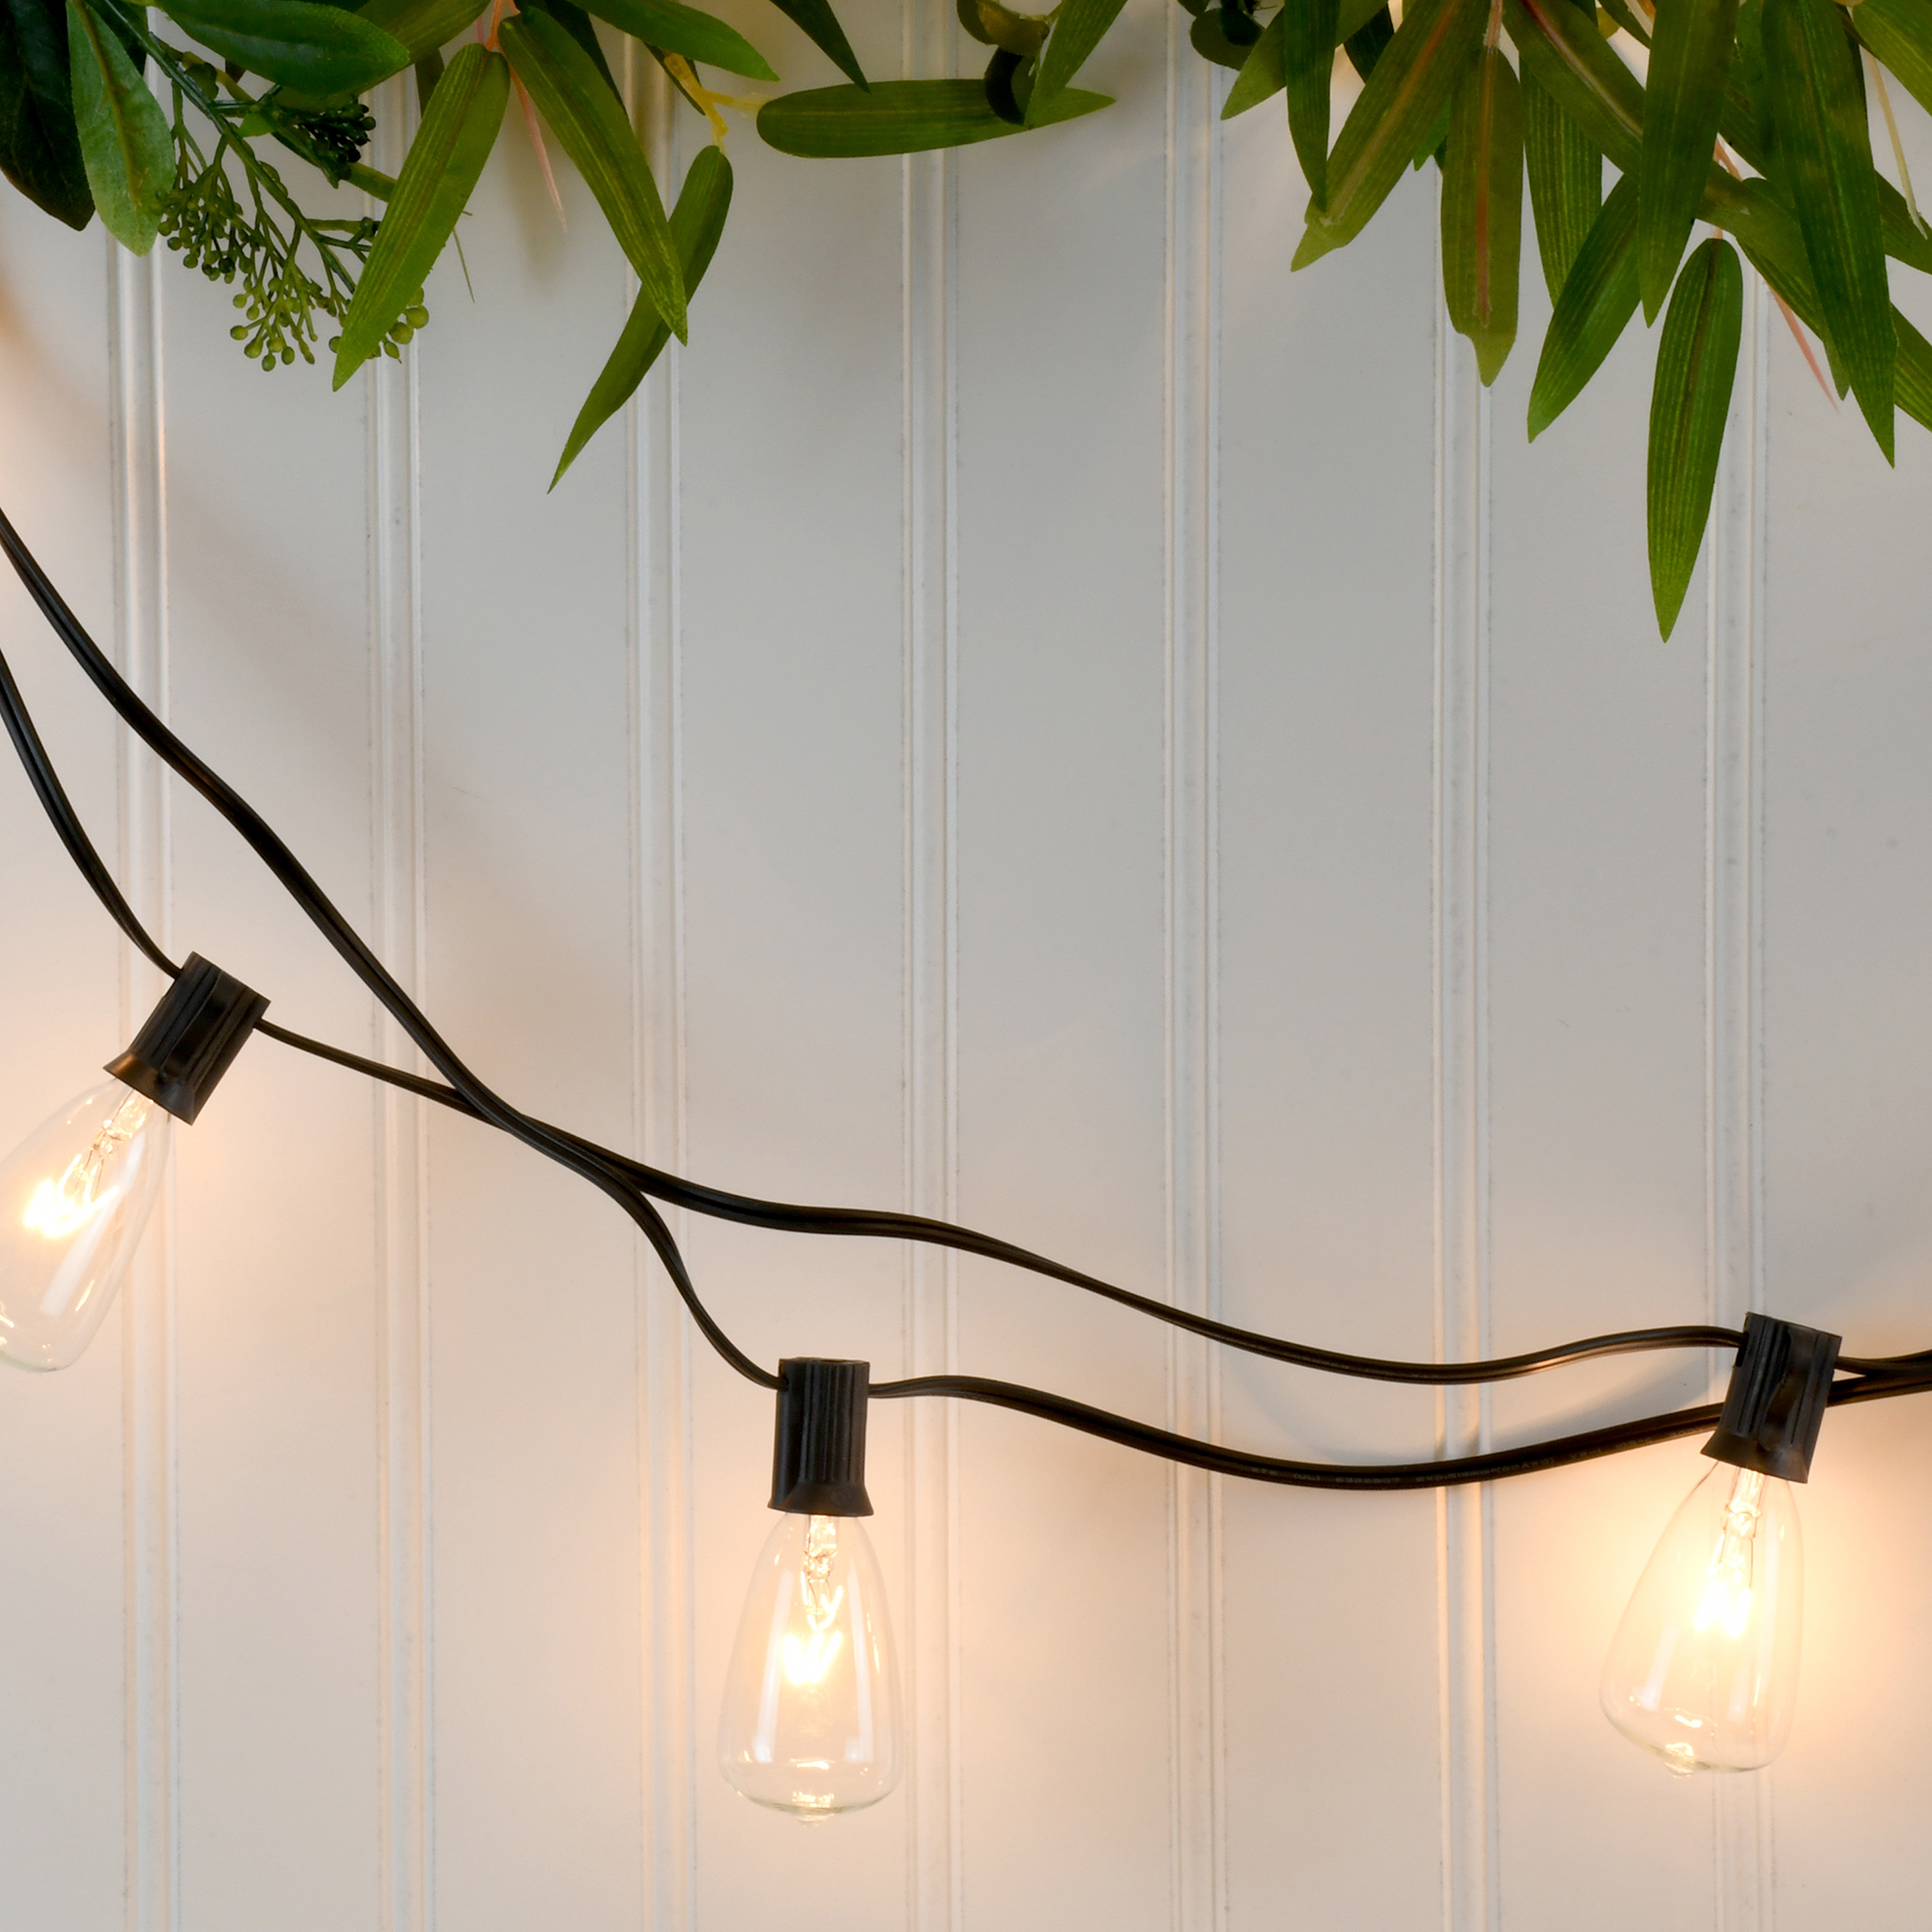 LumaBase Electric String Lights with 10 Edison Bulbs - image 2 of 9